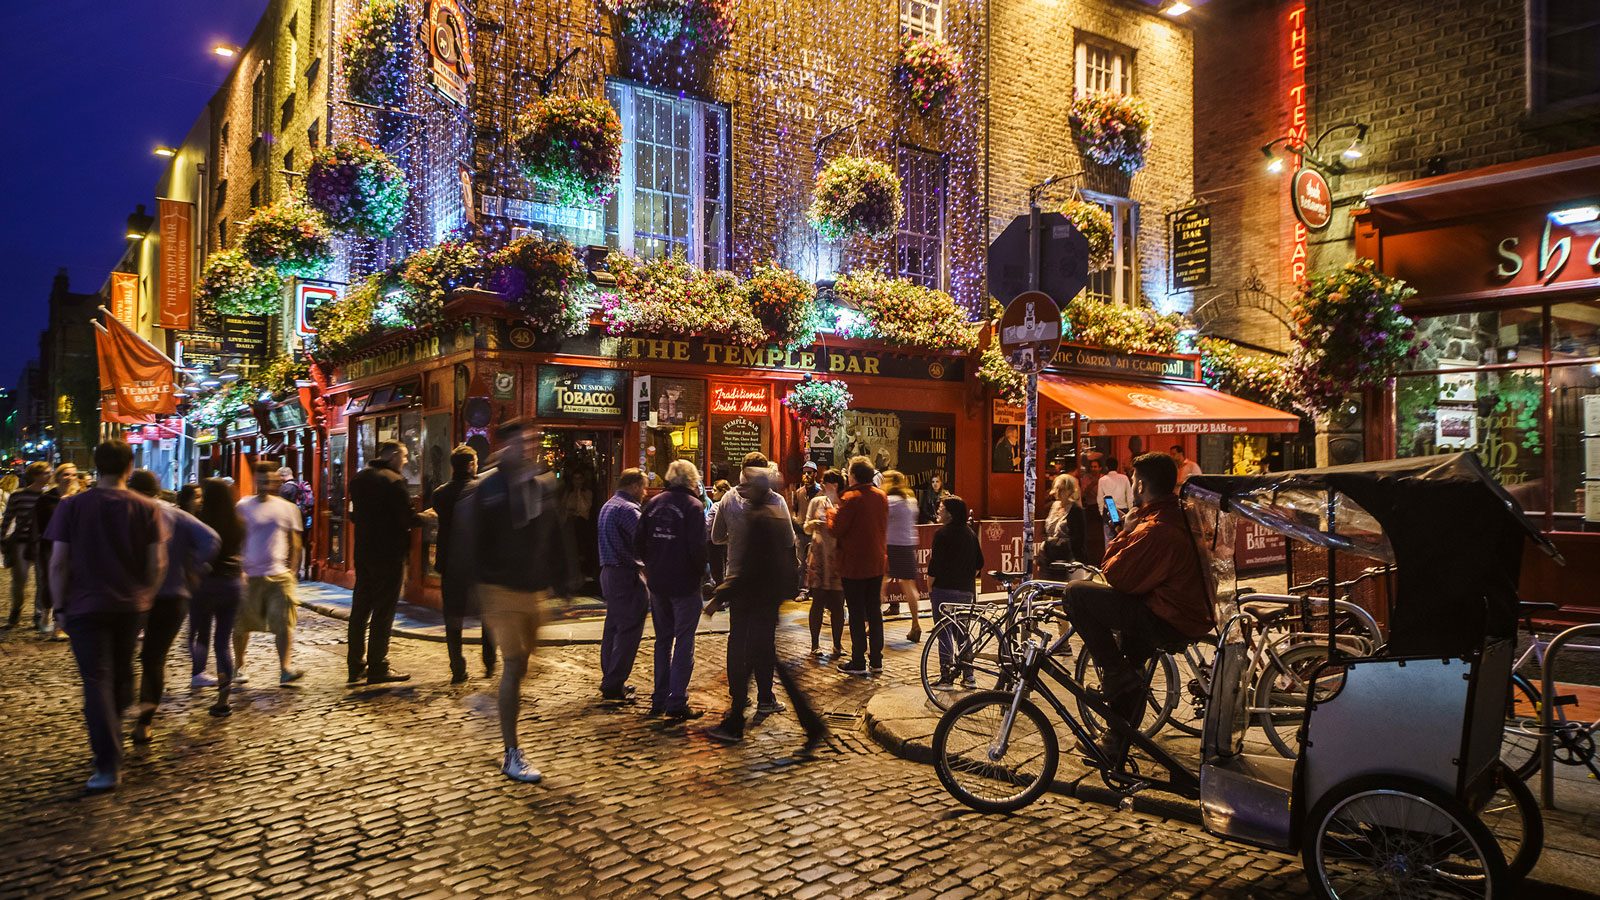 Crowd of people at night outside Temple Bar in Dublin, Ireland